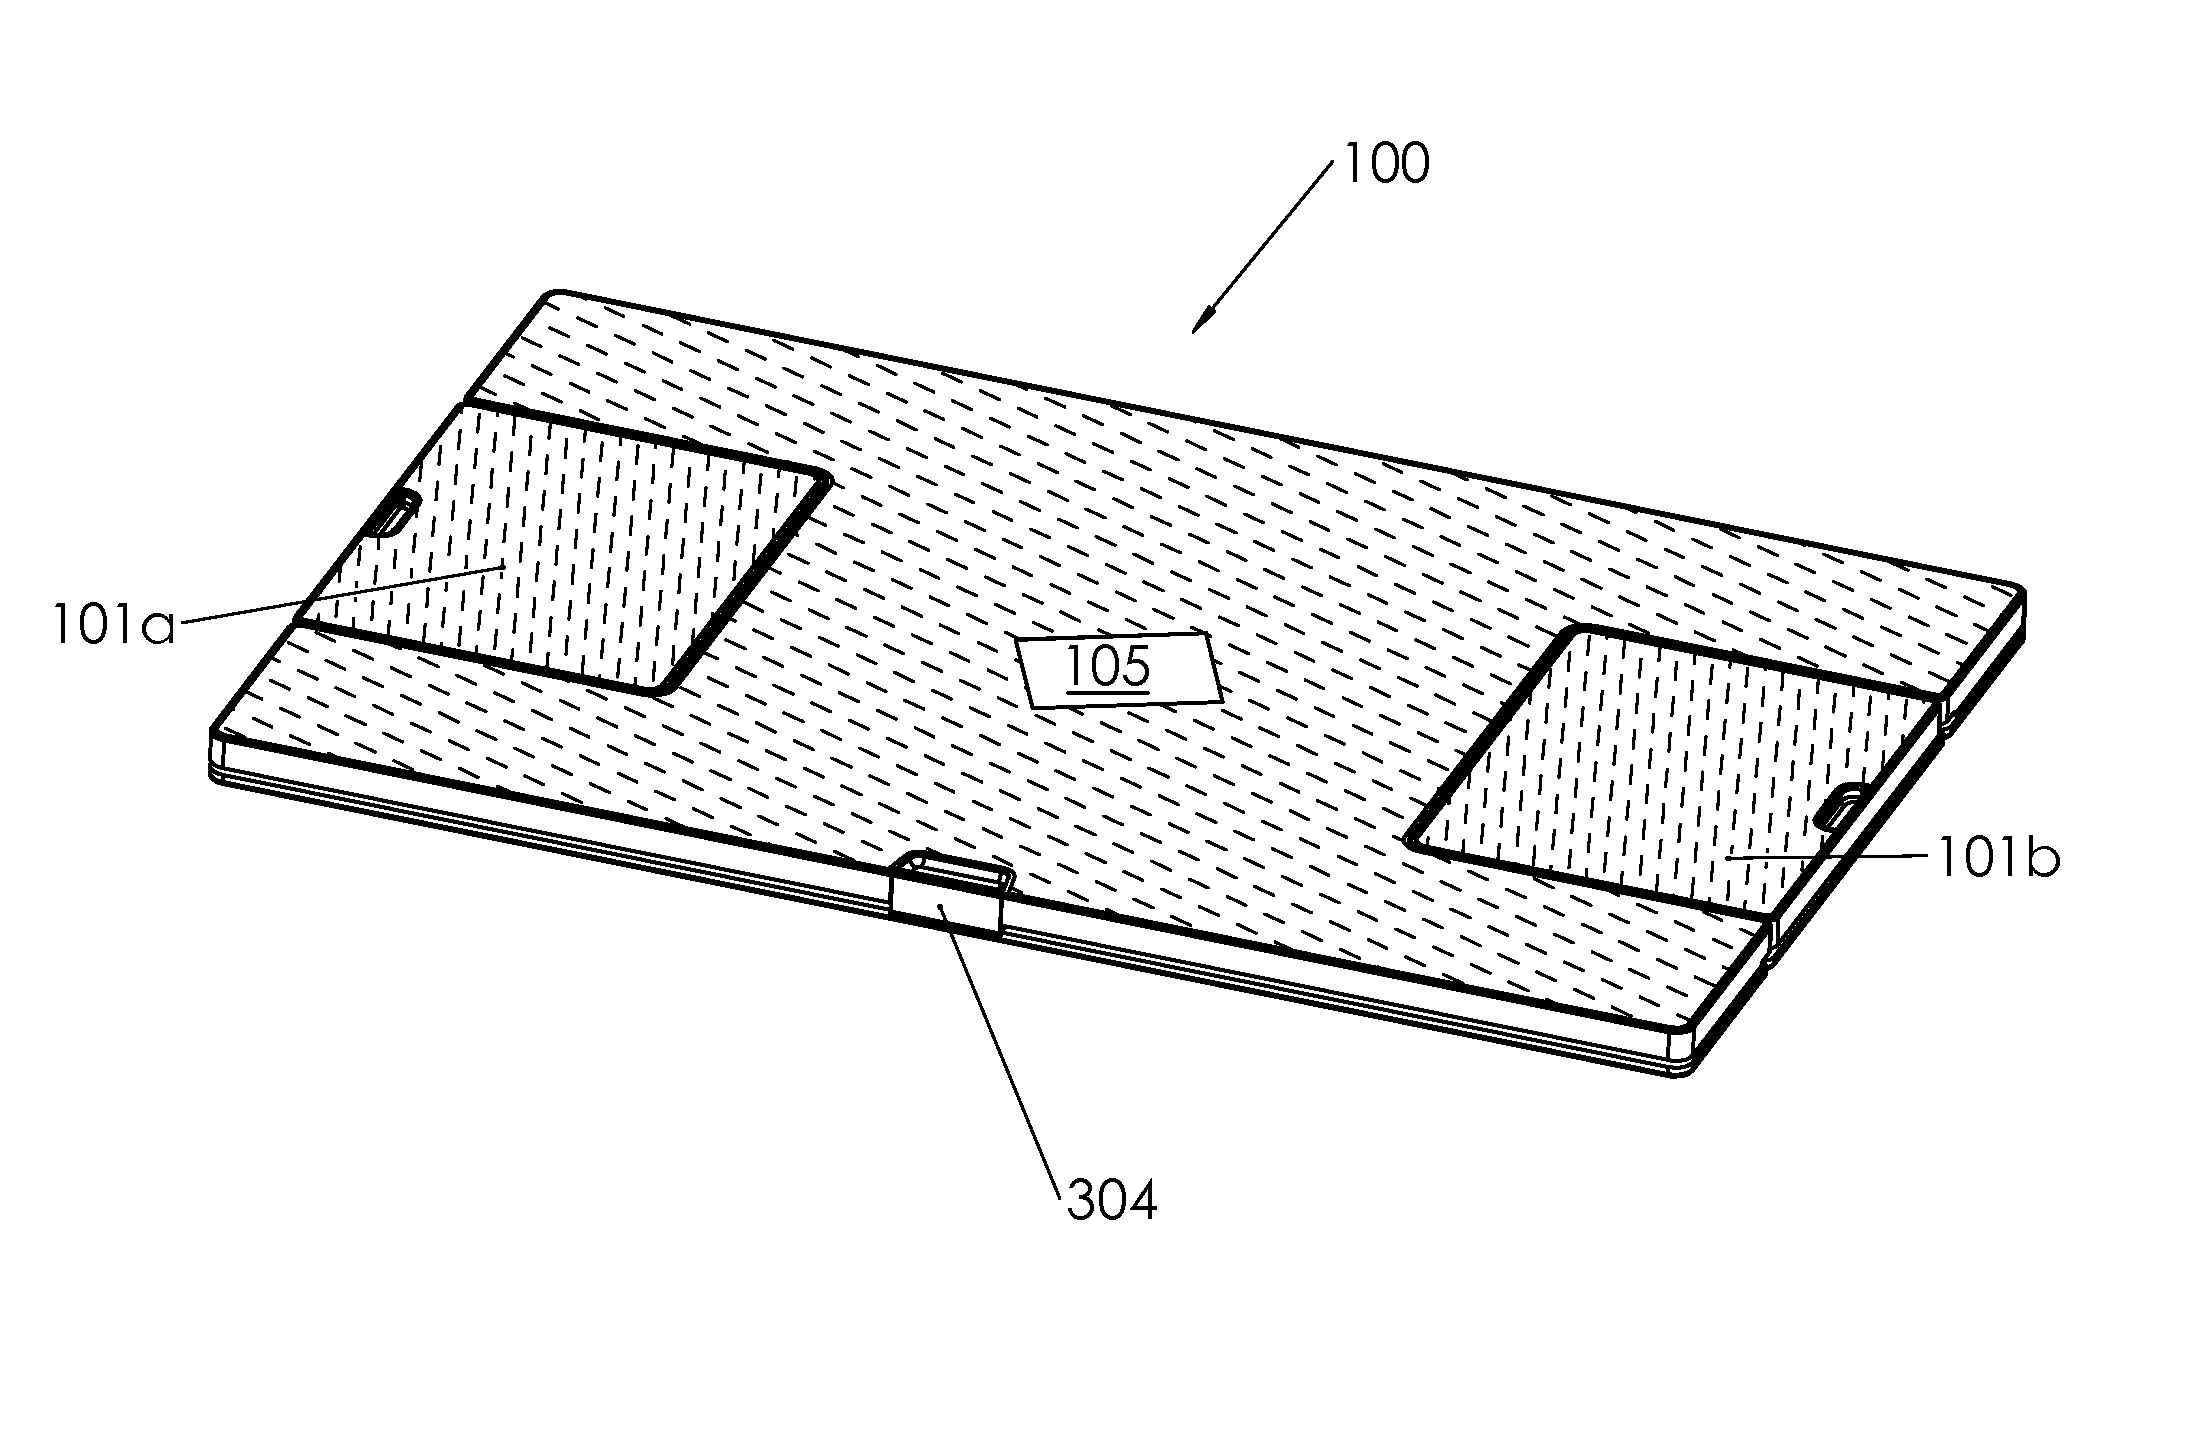 Vibration cancelling platform for use with laptops or table computers used in moving vehicles